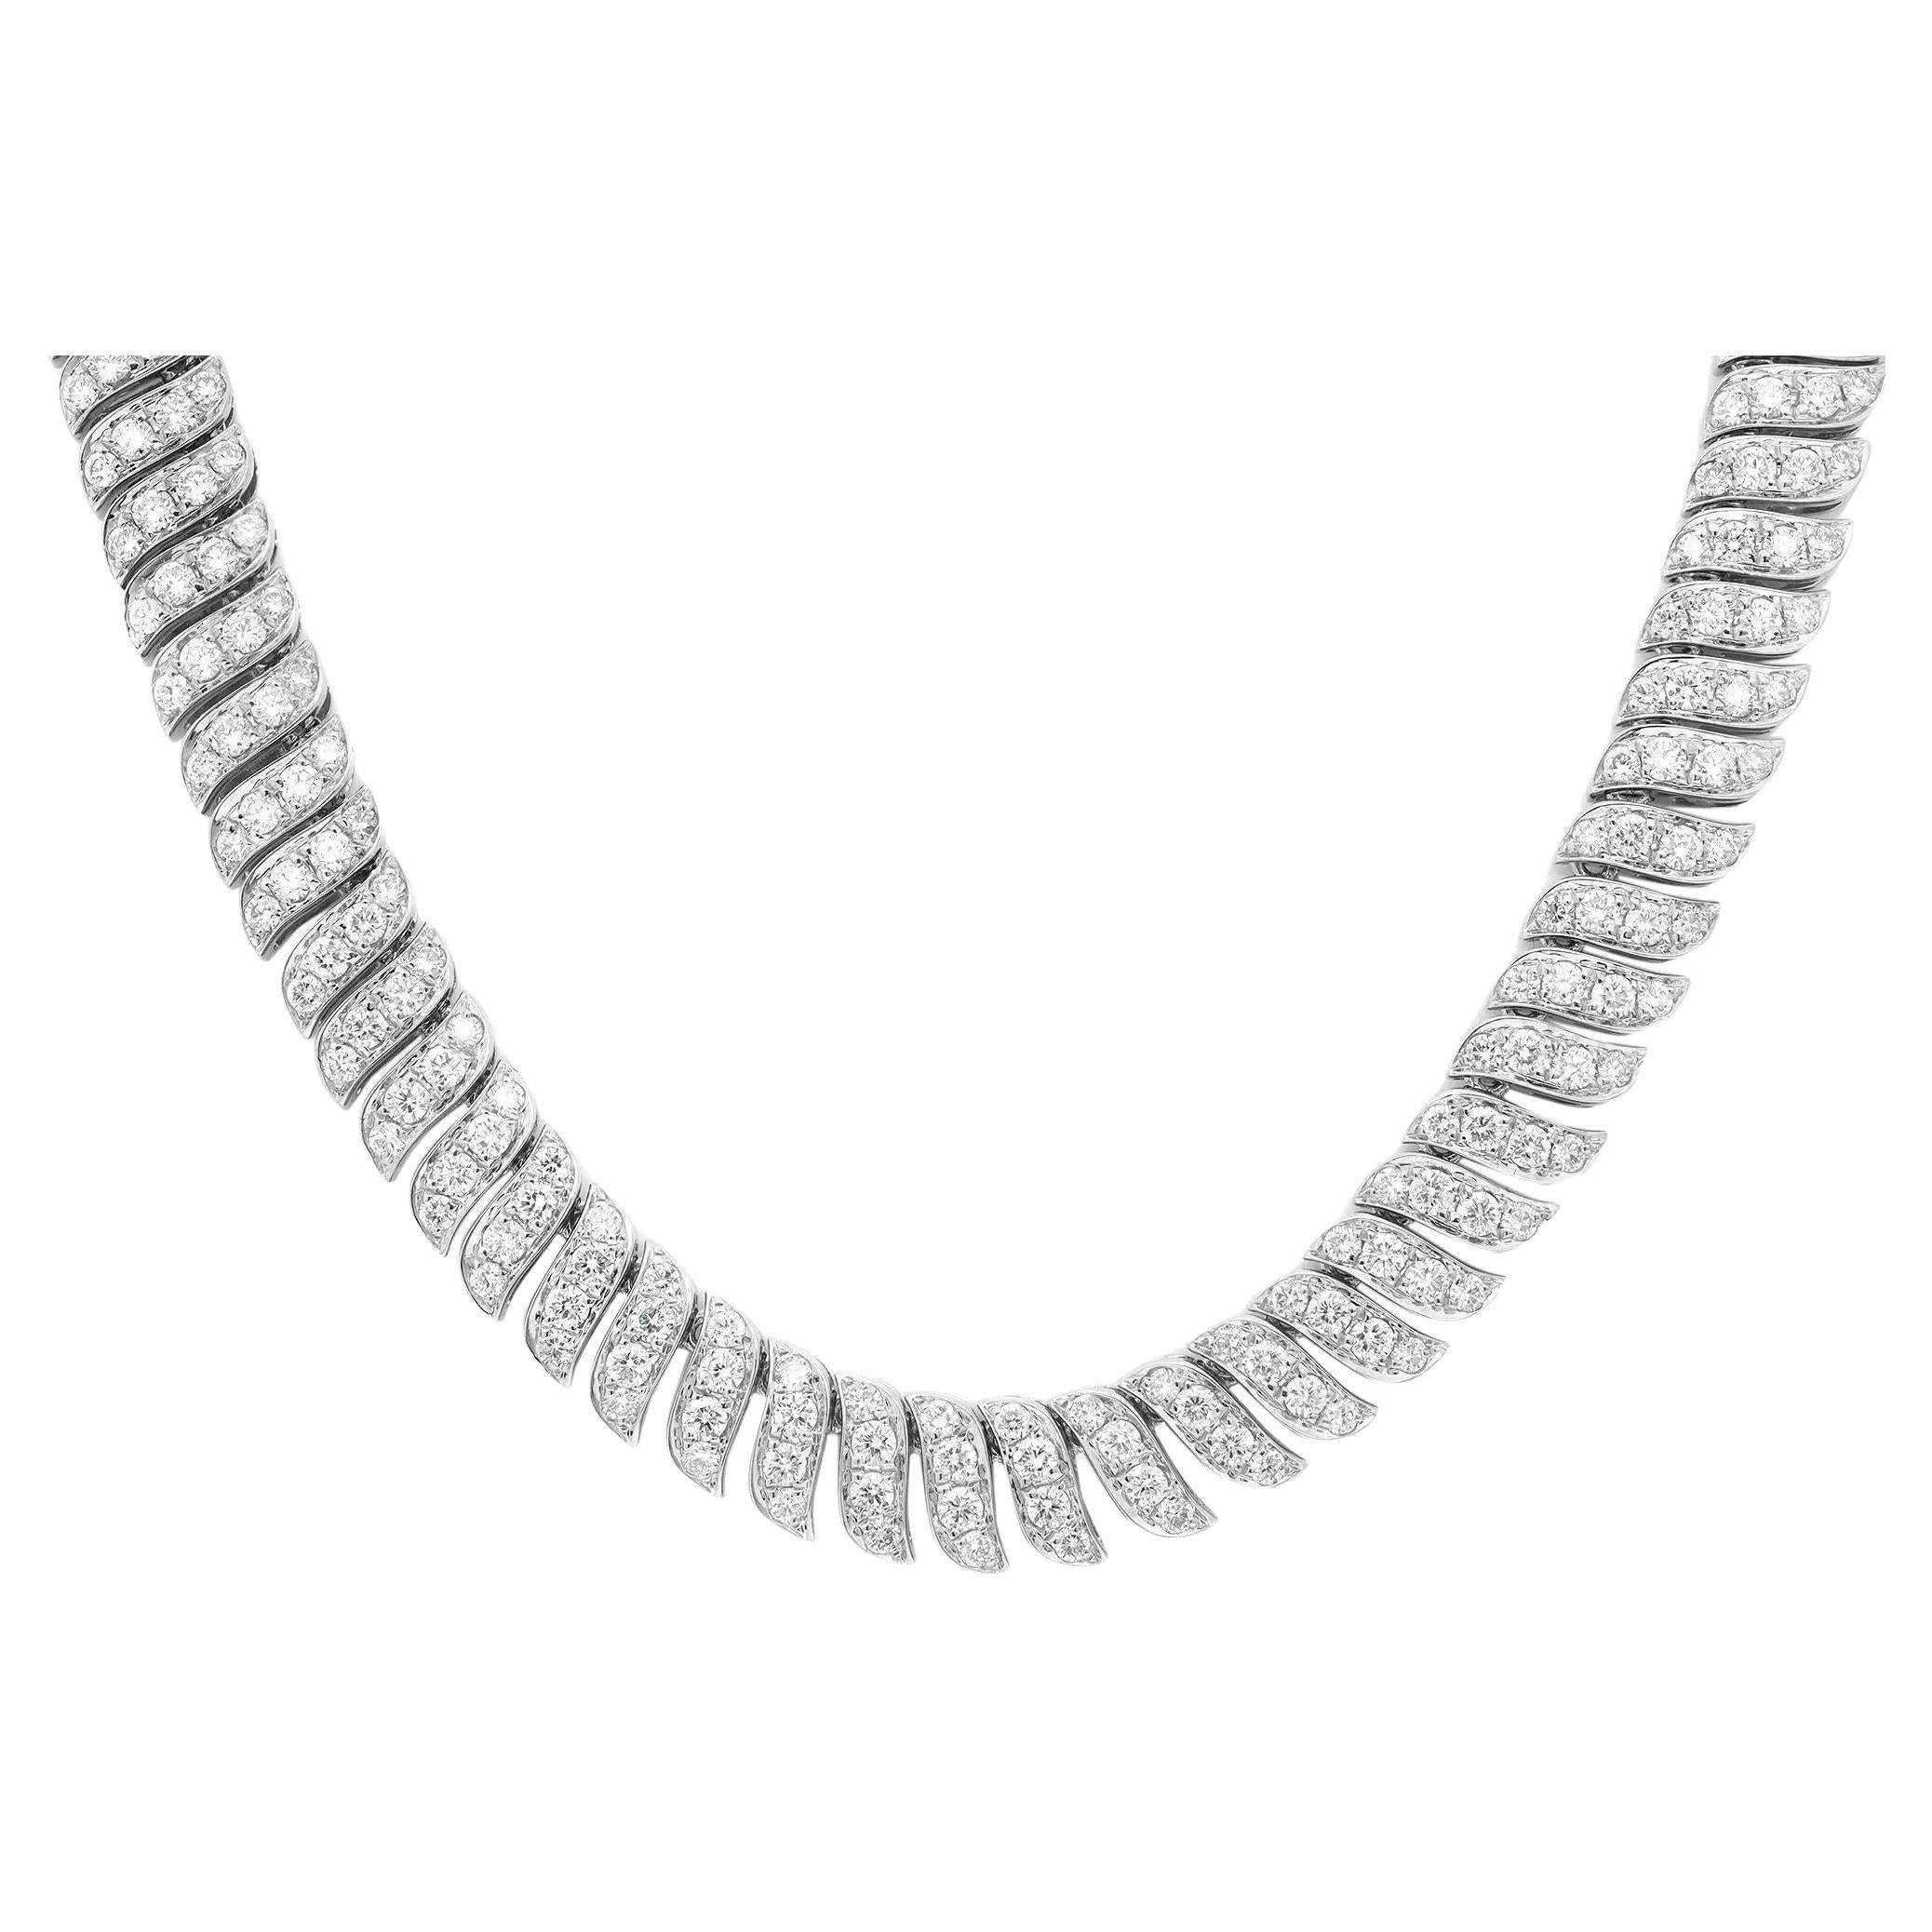 8.33Cttw Round Cut Diamond Statement Necklace 18K White Gold 16 Inches For Sale